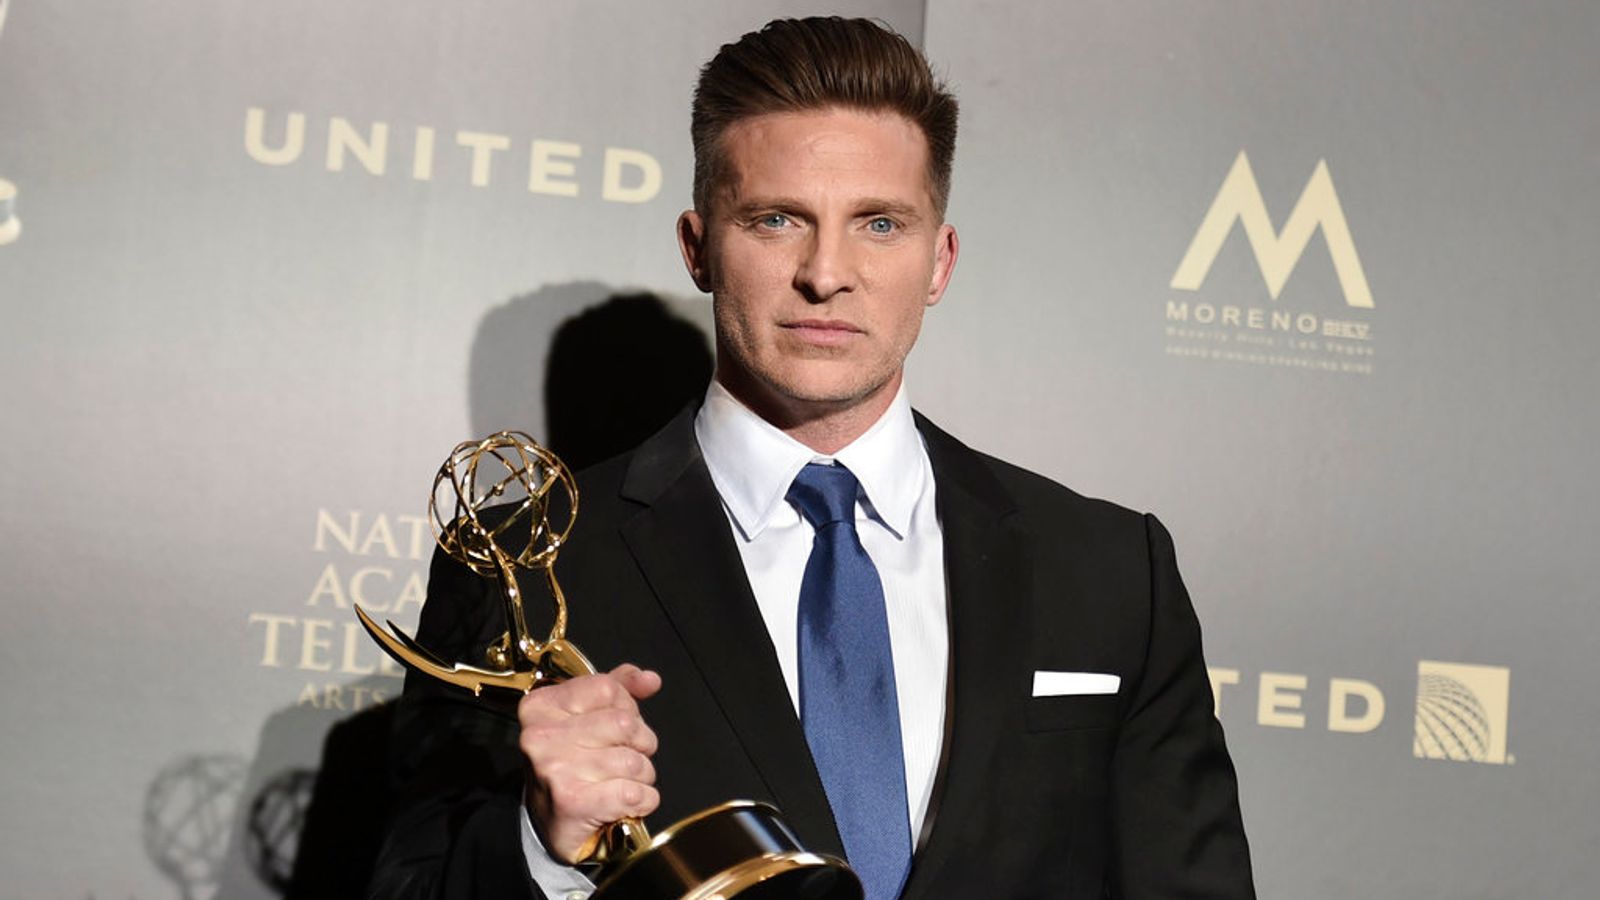 COVID-19: General Hospital actor Steve Burton says he has been fired over his refusal to get vaccinated